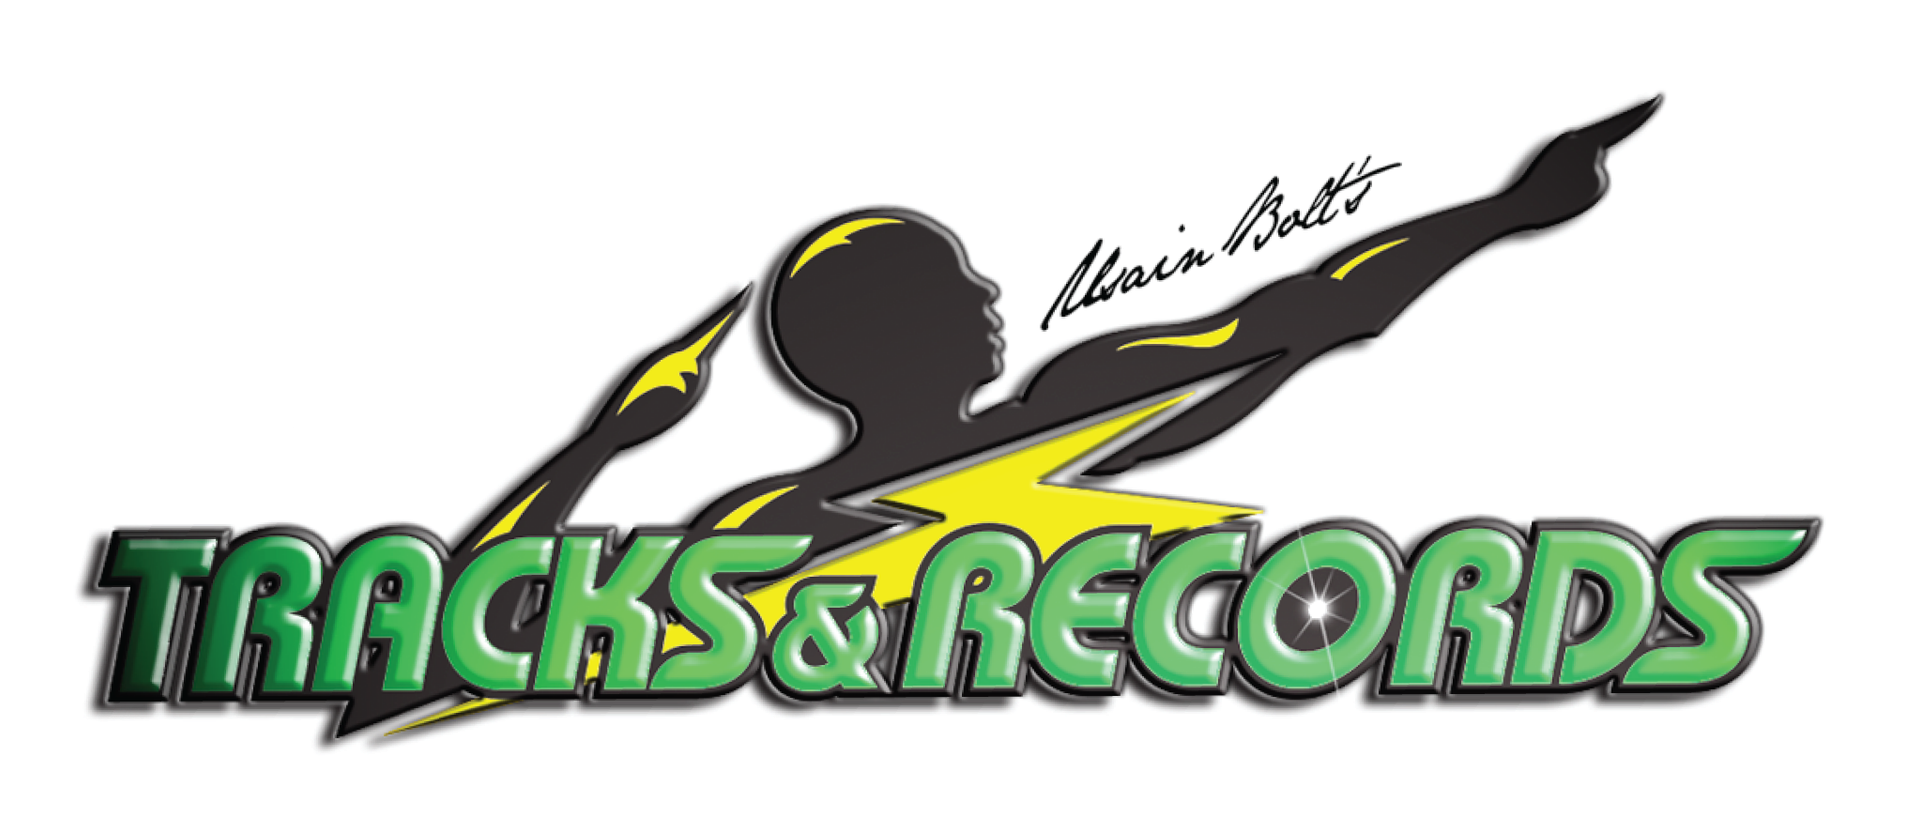 Ub's Tracks & Records Jamaica On Twitter - Track And Record Restaurant (2048x919)